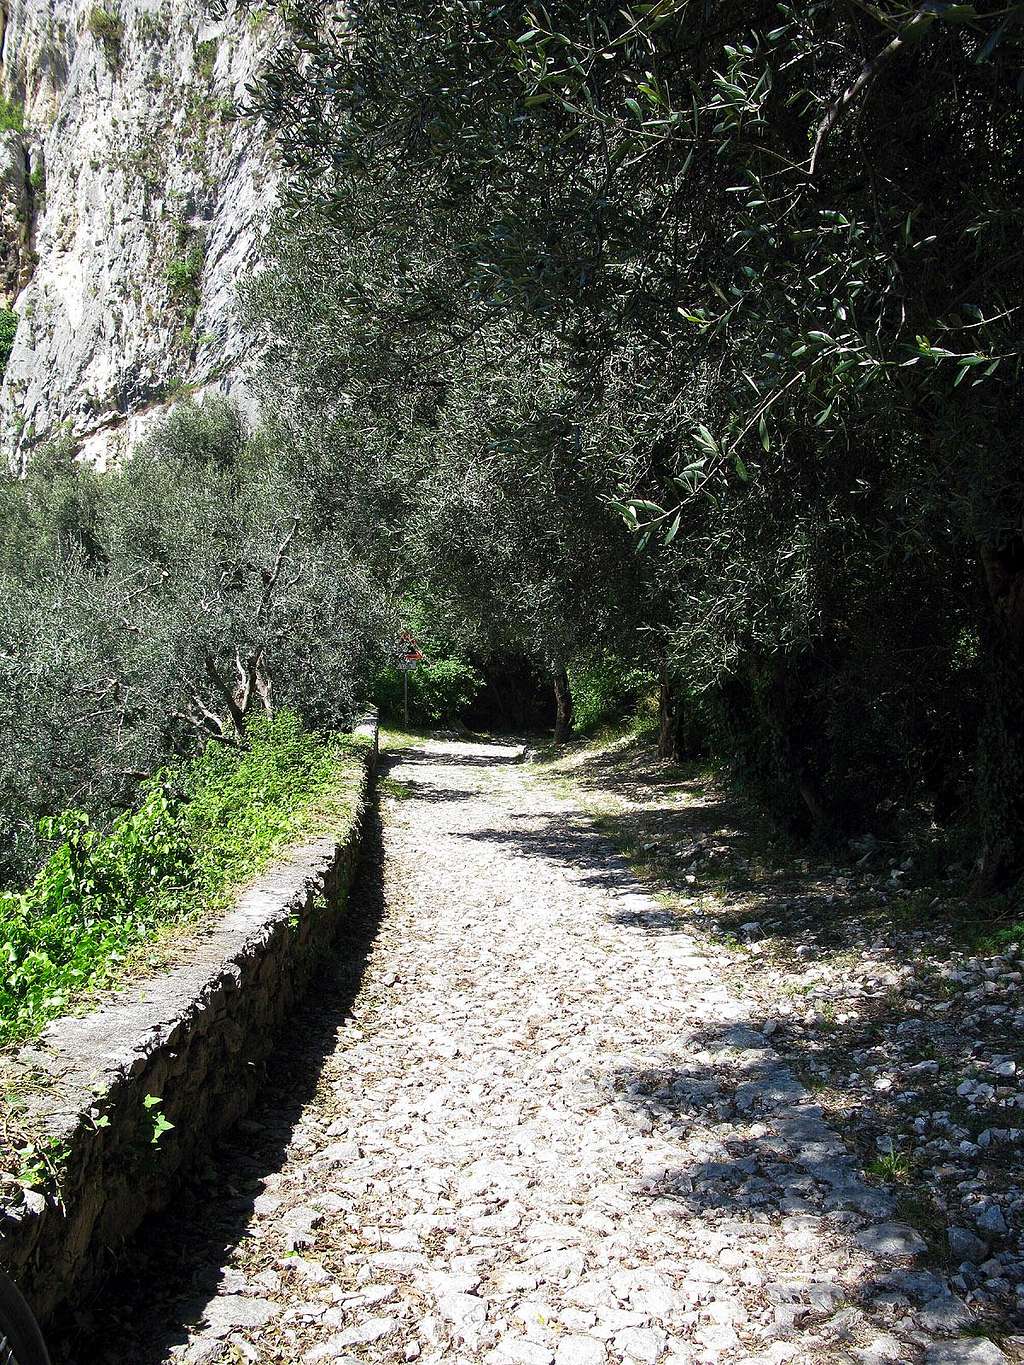 The little valley of Santa Lucia